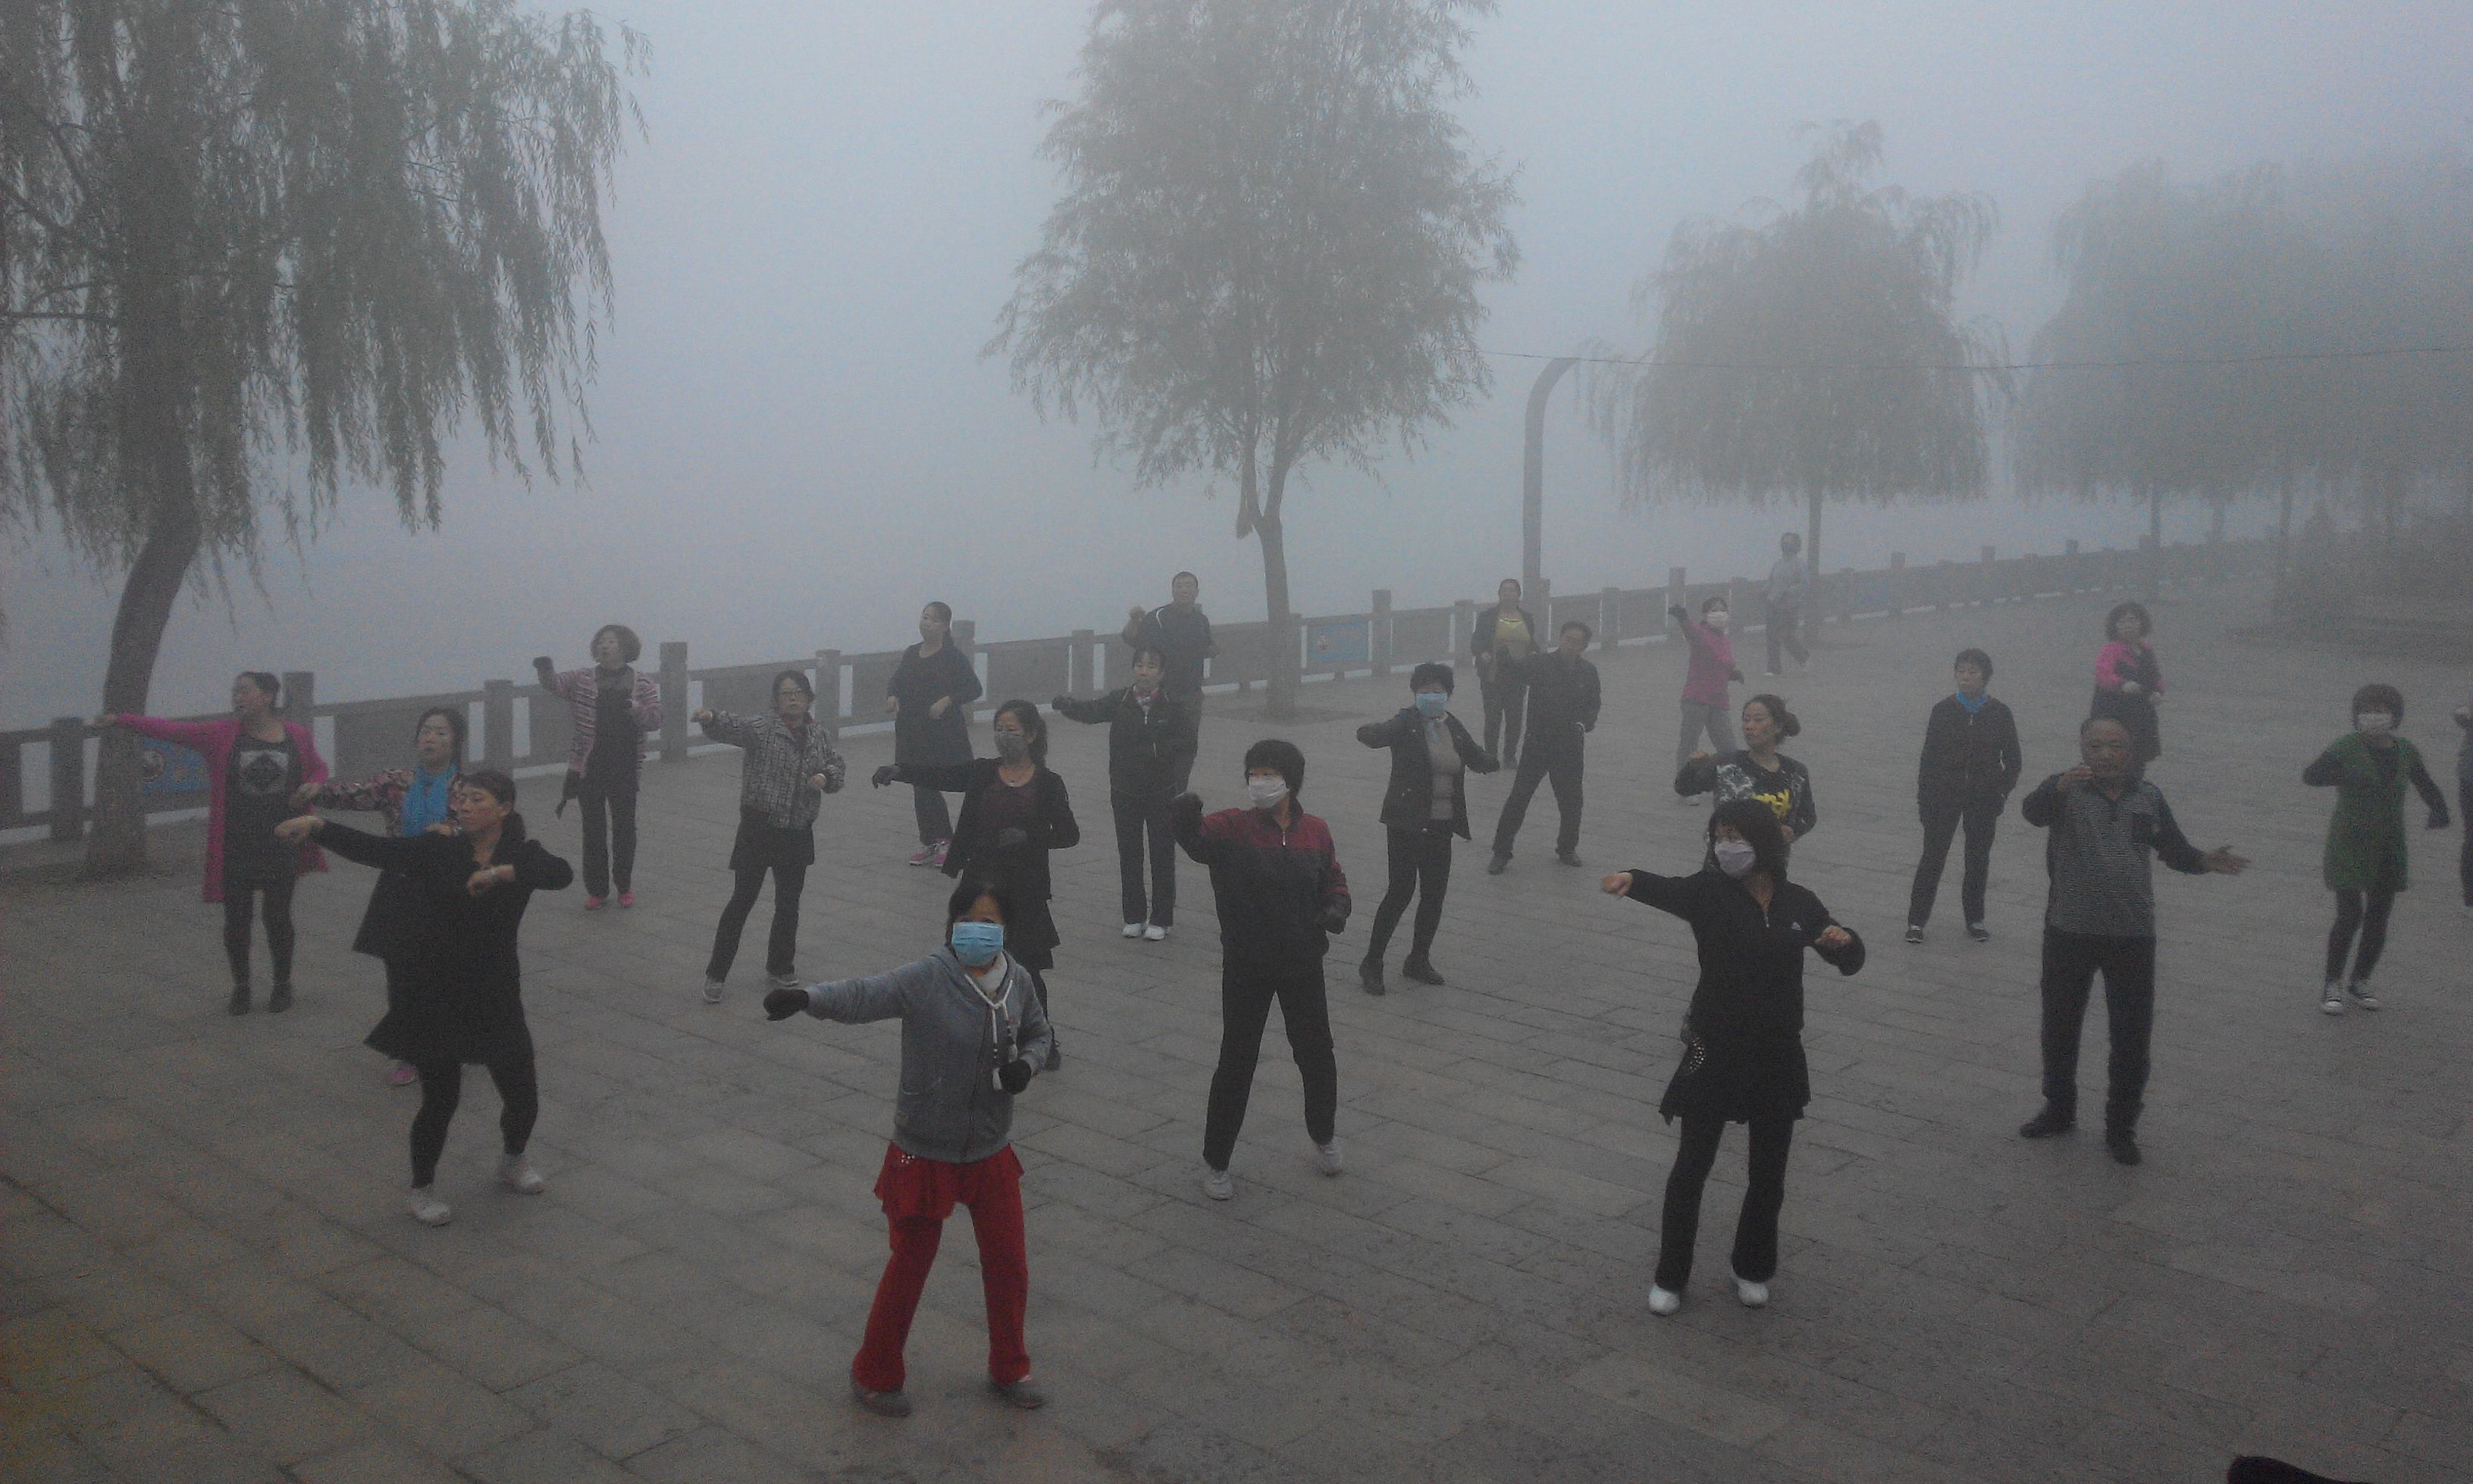 Tai chi practitioners don masks for their early morning exercise in Pingquan county, Hebei province on Tuesday. Photo: Xinhua